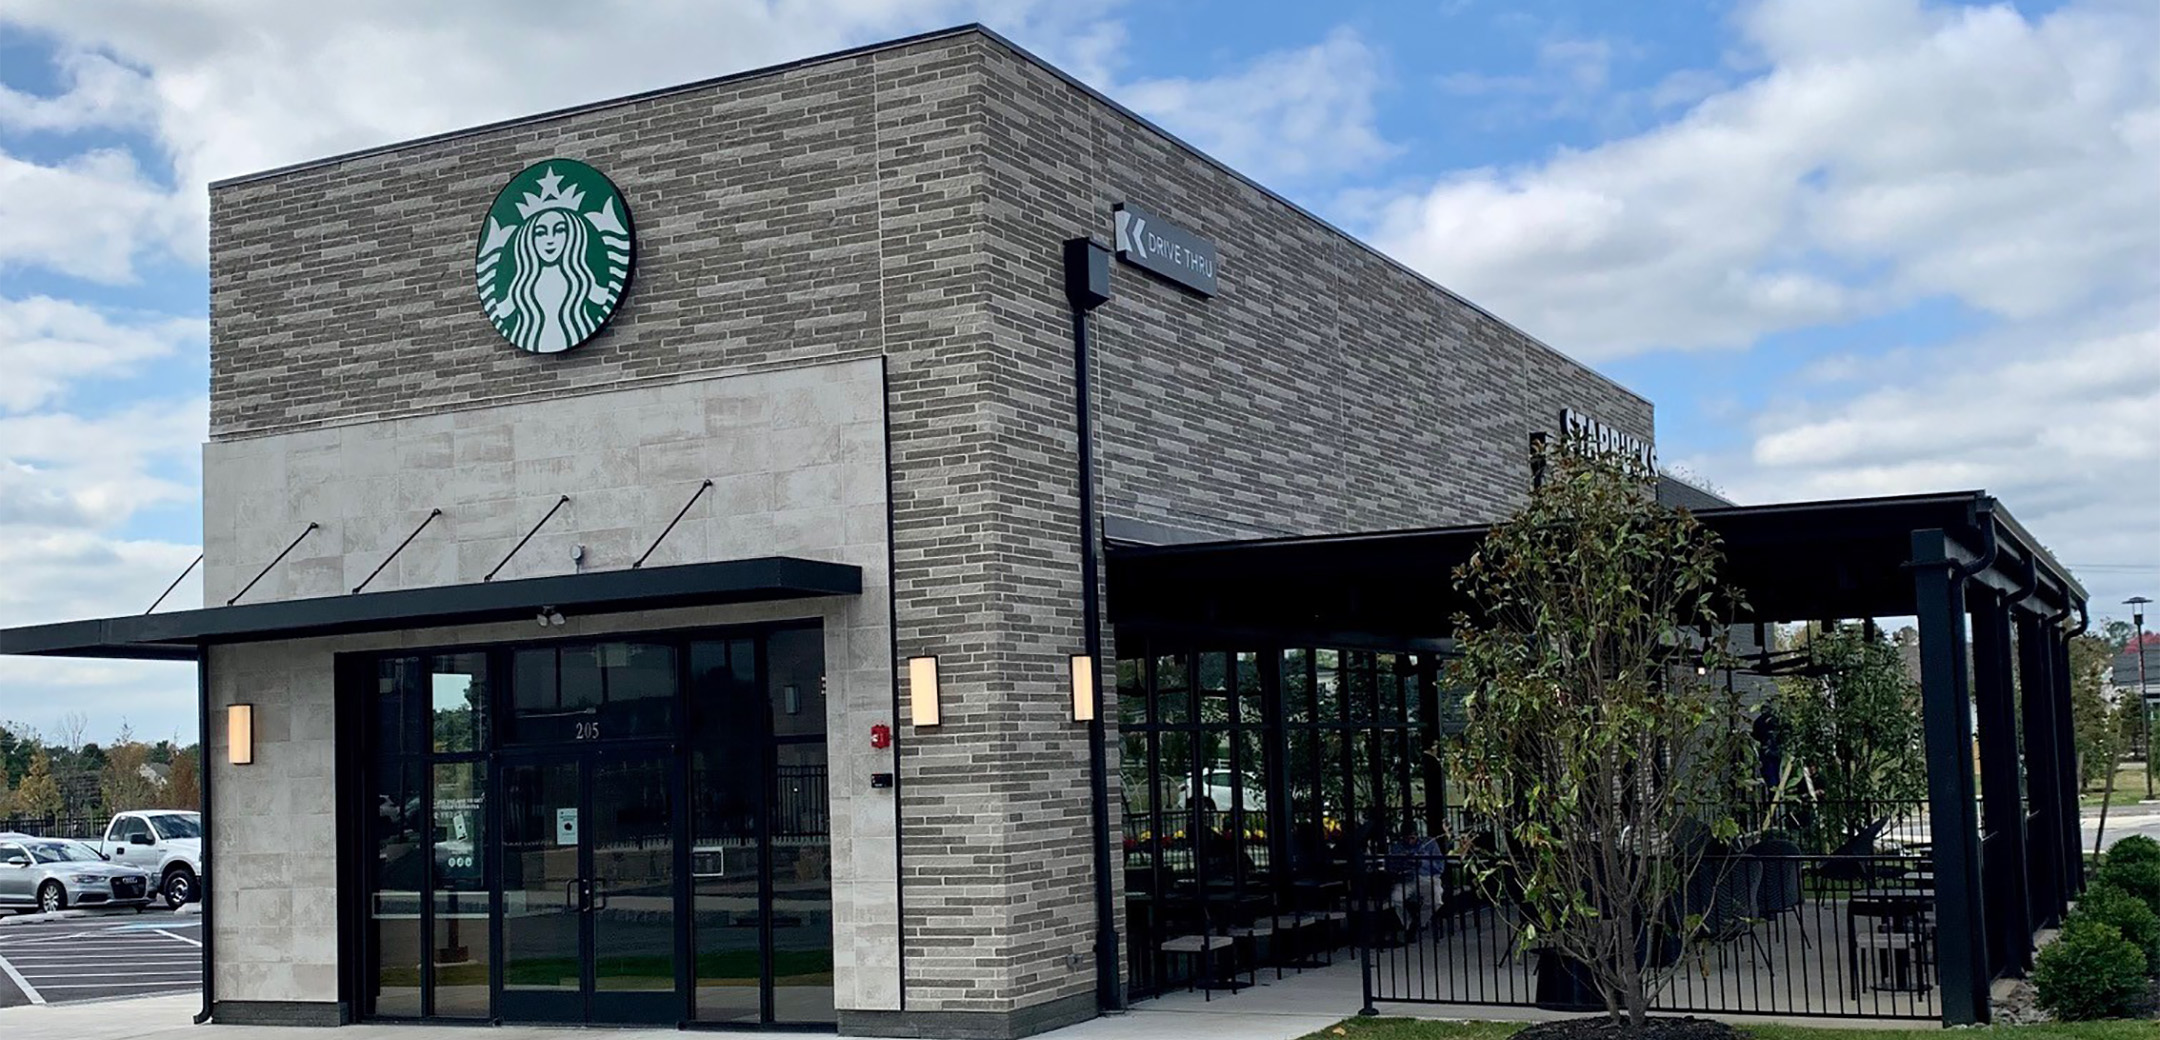 An angled exterior view of the Starbucks front entrance, logo above the overhang glass door and covered outside seating.